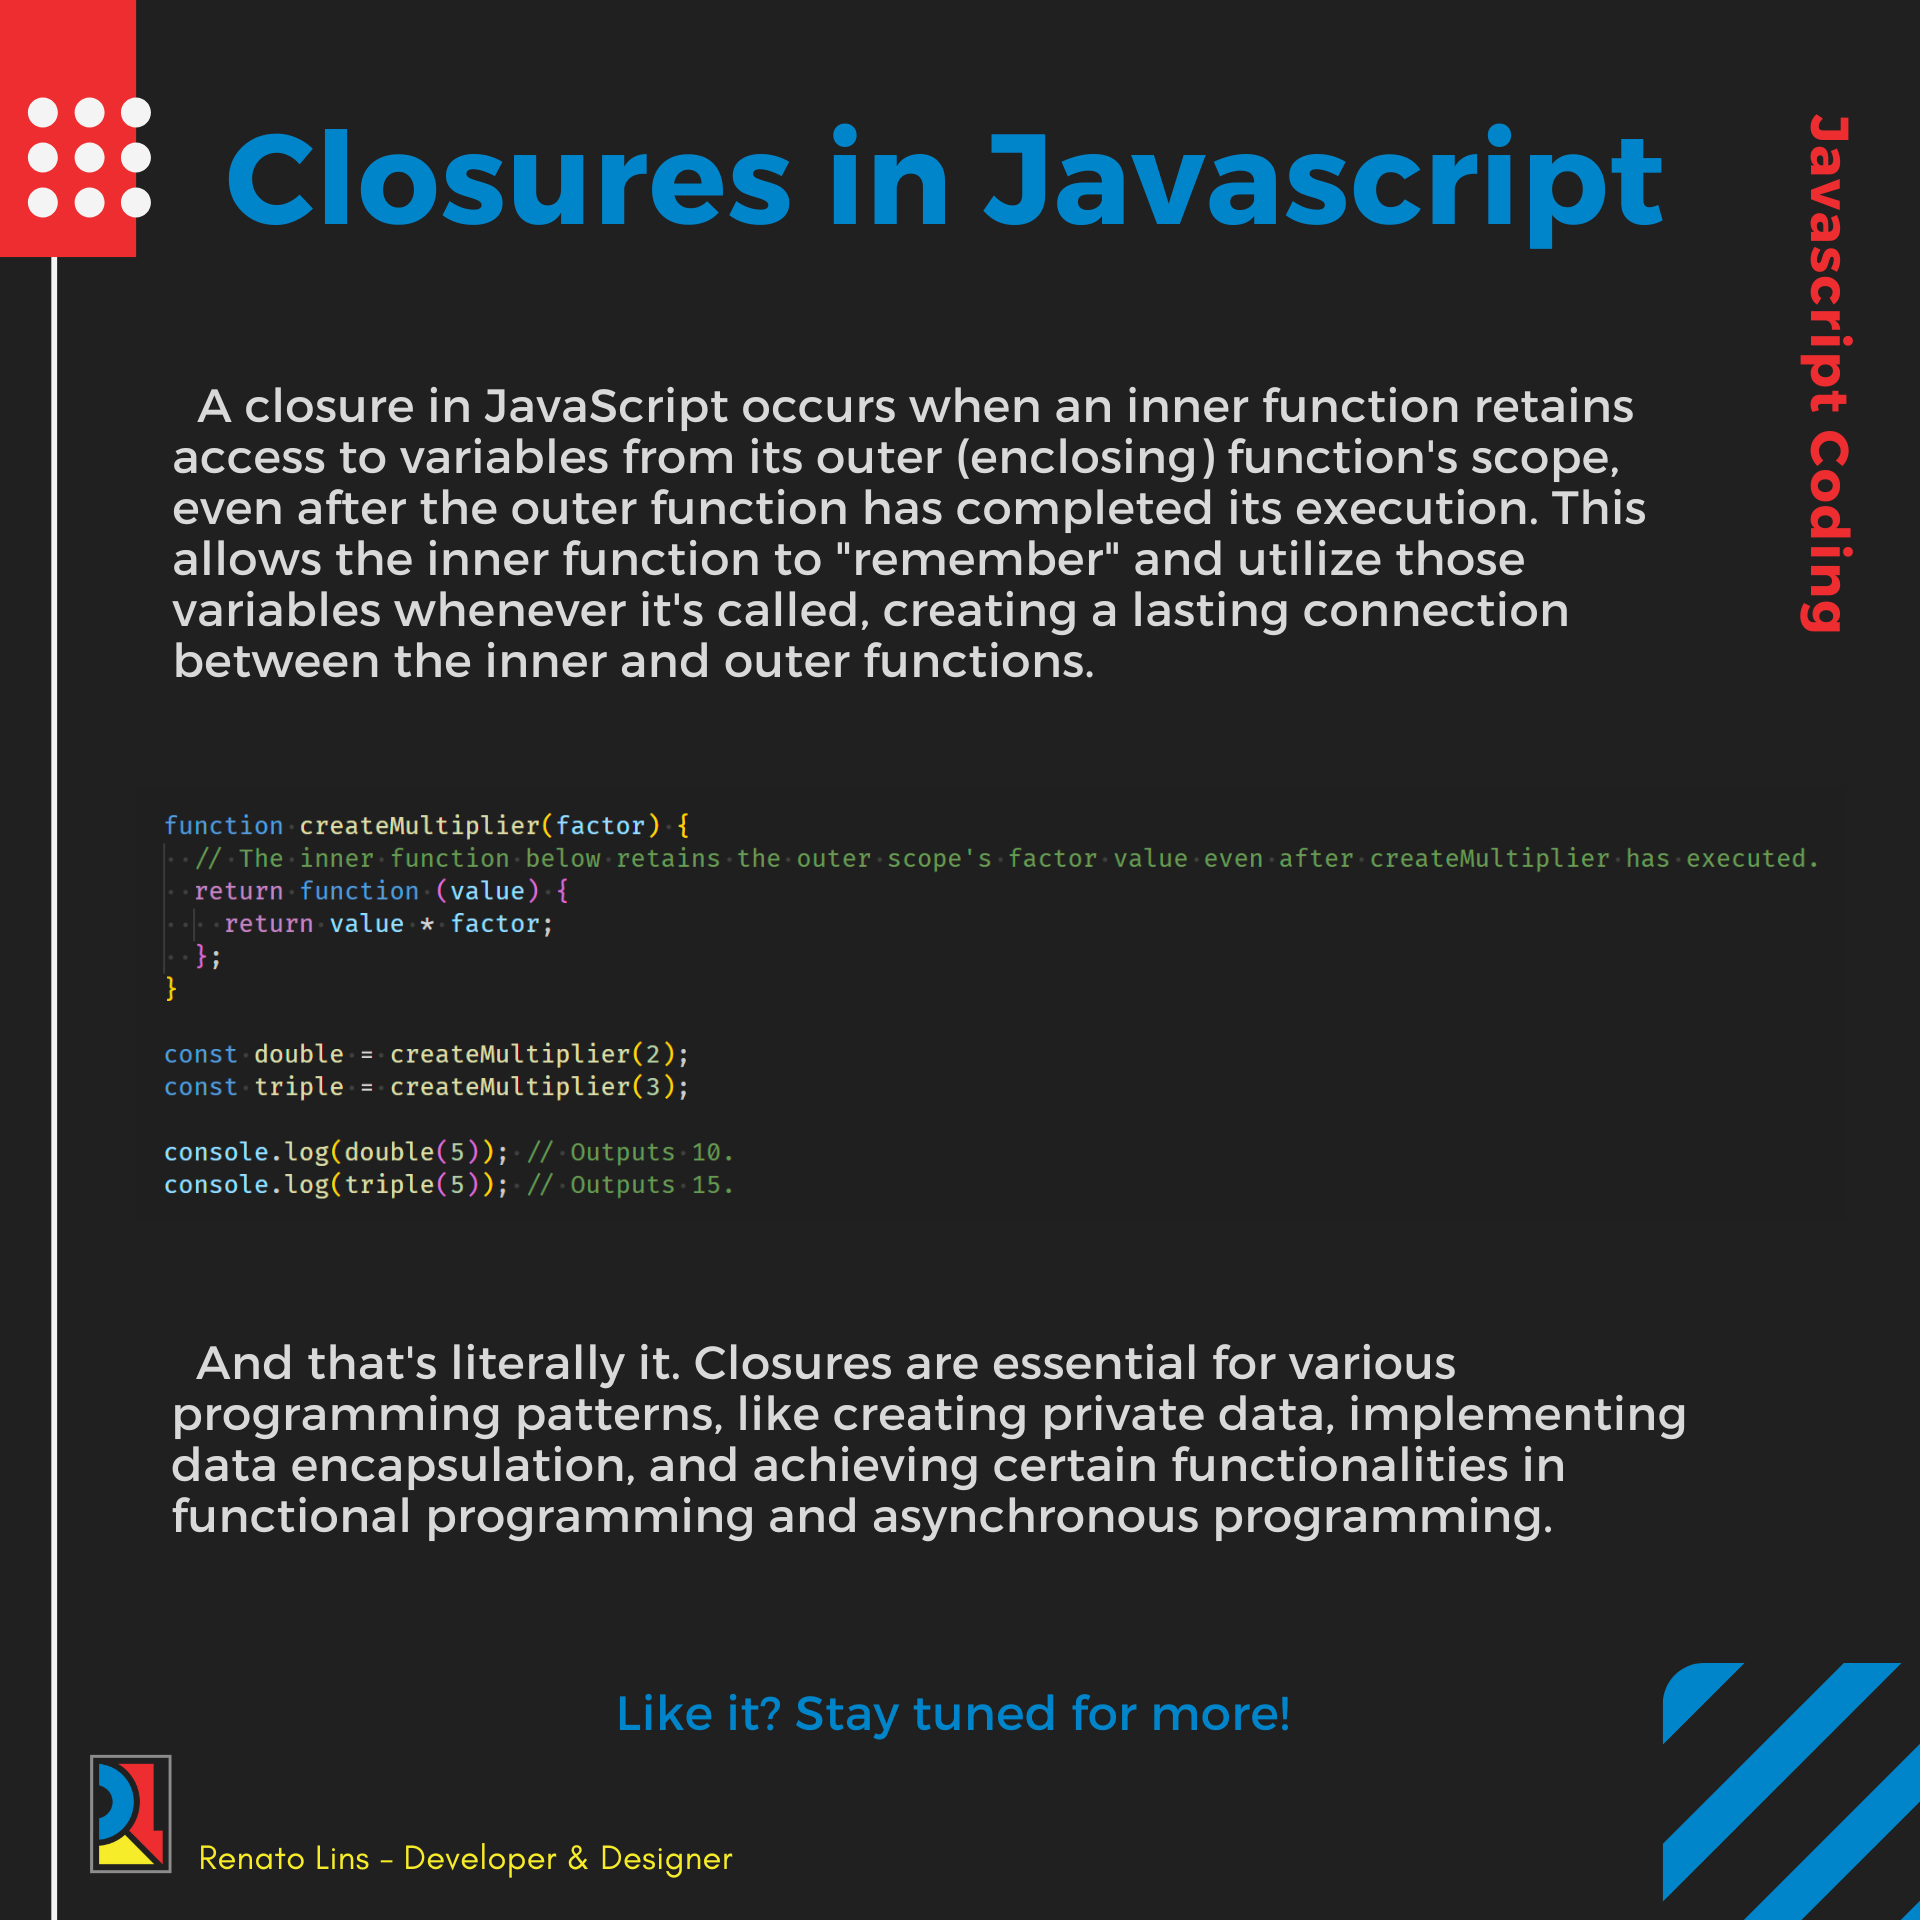 A closure in JavaScript occurs when an inner function retains
access to variables from its outer (enclosing) function's scope,
even after the outer function has completed its execution. This
allows the inner function to "remember" and utilize those
variables whenever it's called, creating a lasting connection
between the inner and outer functions.

function createMultiplier(factor) {

The inner function: below retair the outer cope factor value -even-after createMultiplier has executed.

return function (value) {
return value * factor;
IH

}

createMultiplier(2);
createMultiplier(3);

const double
const triple

console.log(double(5)); Outputs 10
console.log(triple(5)); ITT!

And that's literally it. Closures are essential for various
programming patterns, like creating private data, implementing
data encapsulation, and achieving certain functionalities in
functional programming and asynchronous programming.

Rl Renato Lins - Developer &amp; Designer